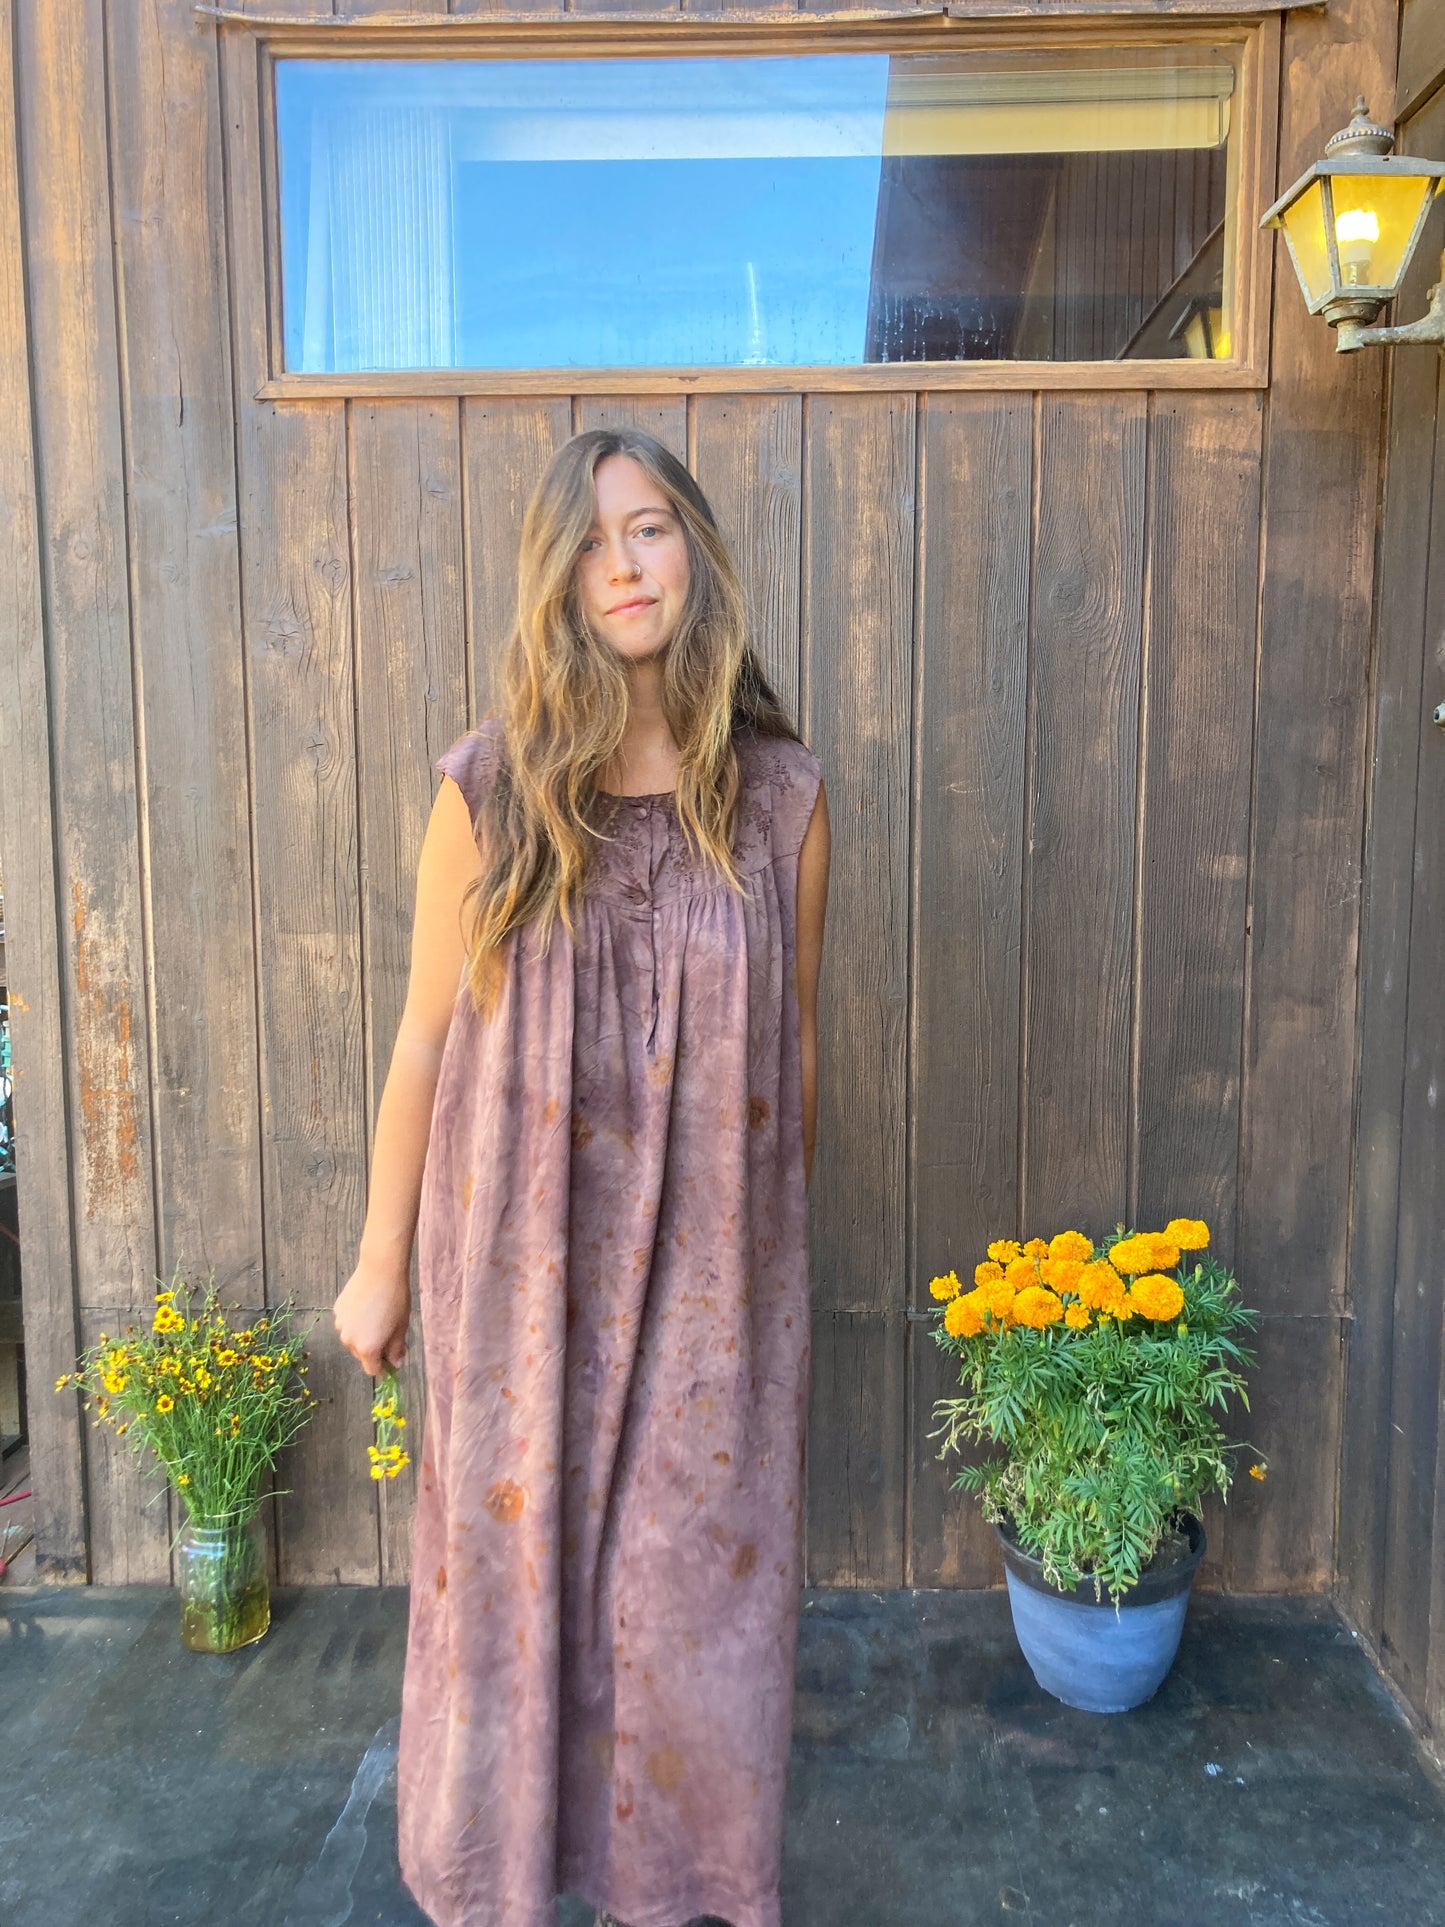 Sequoia, Madder, Coreopsis, Cosmo Silk Bundle Dyed Dream Dress